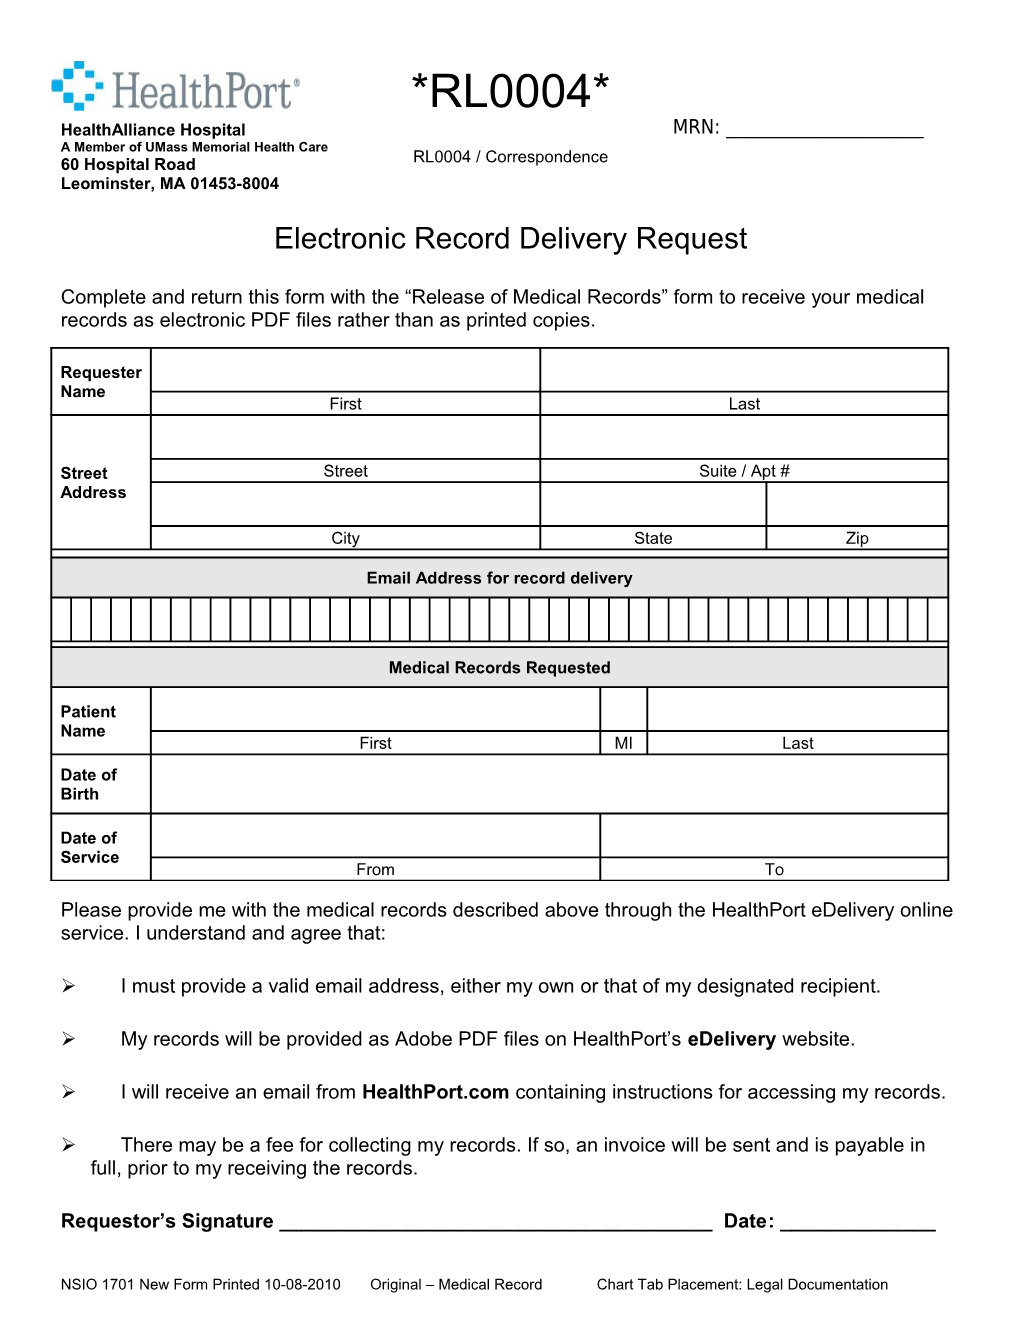 Electronic Record Delivery Request